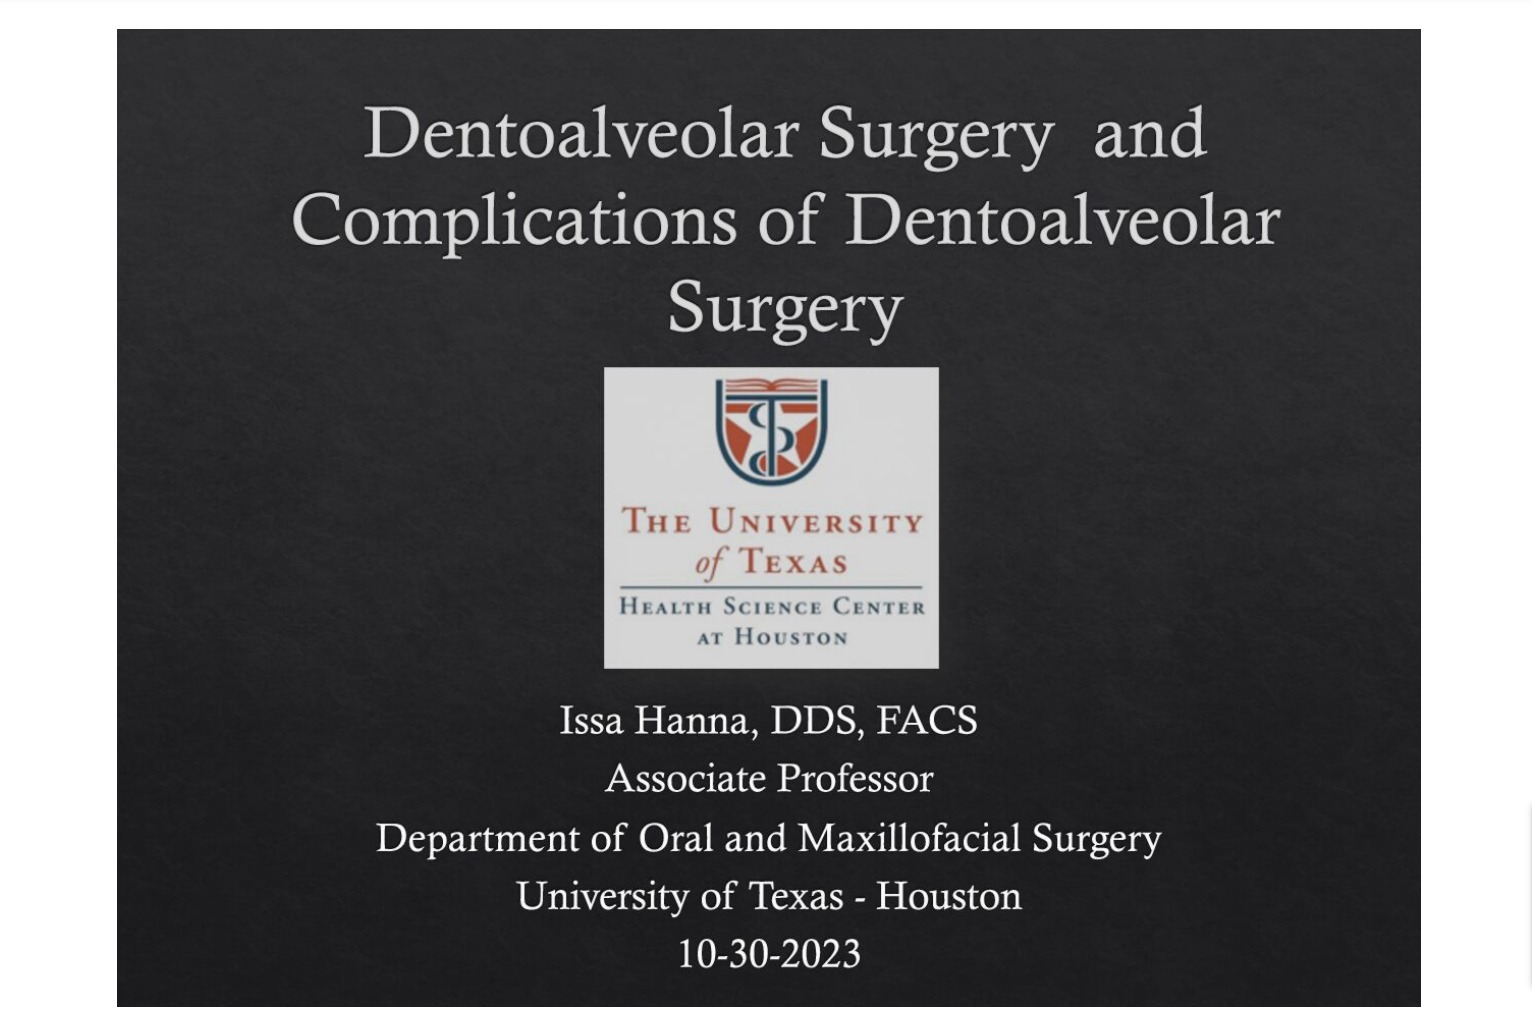 Dento-alveolar Surgery: Surgical Techniques and Management of Surgical Complications